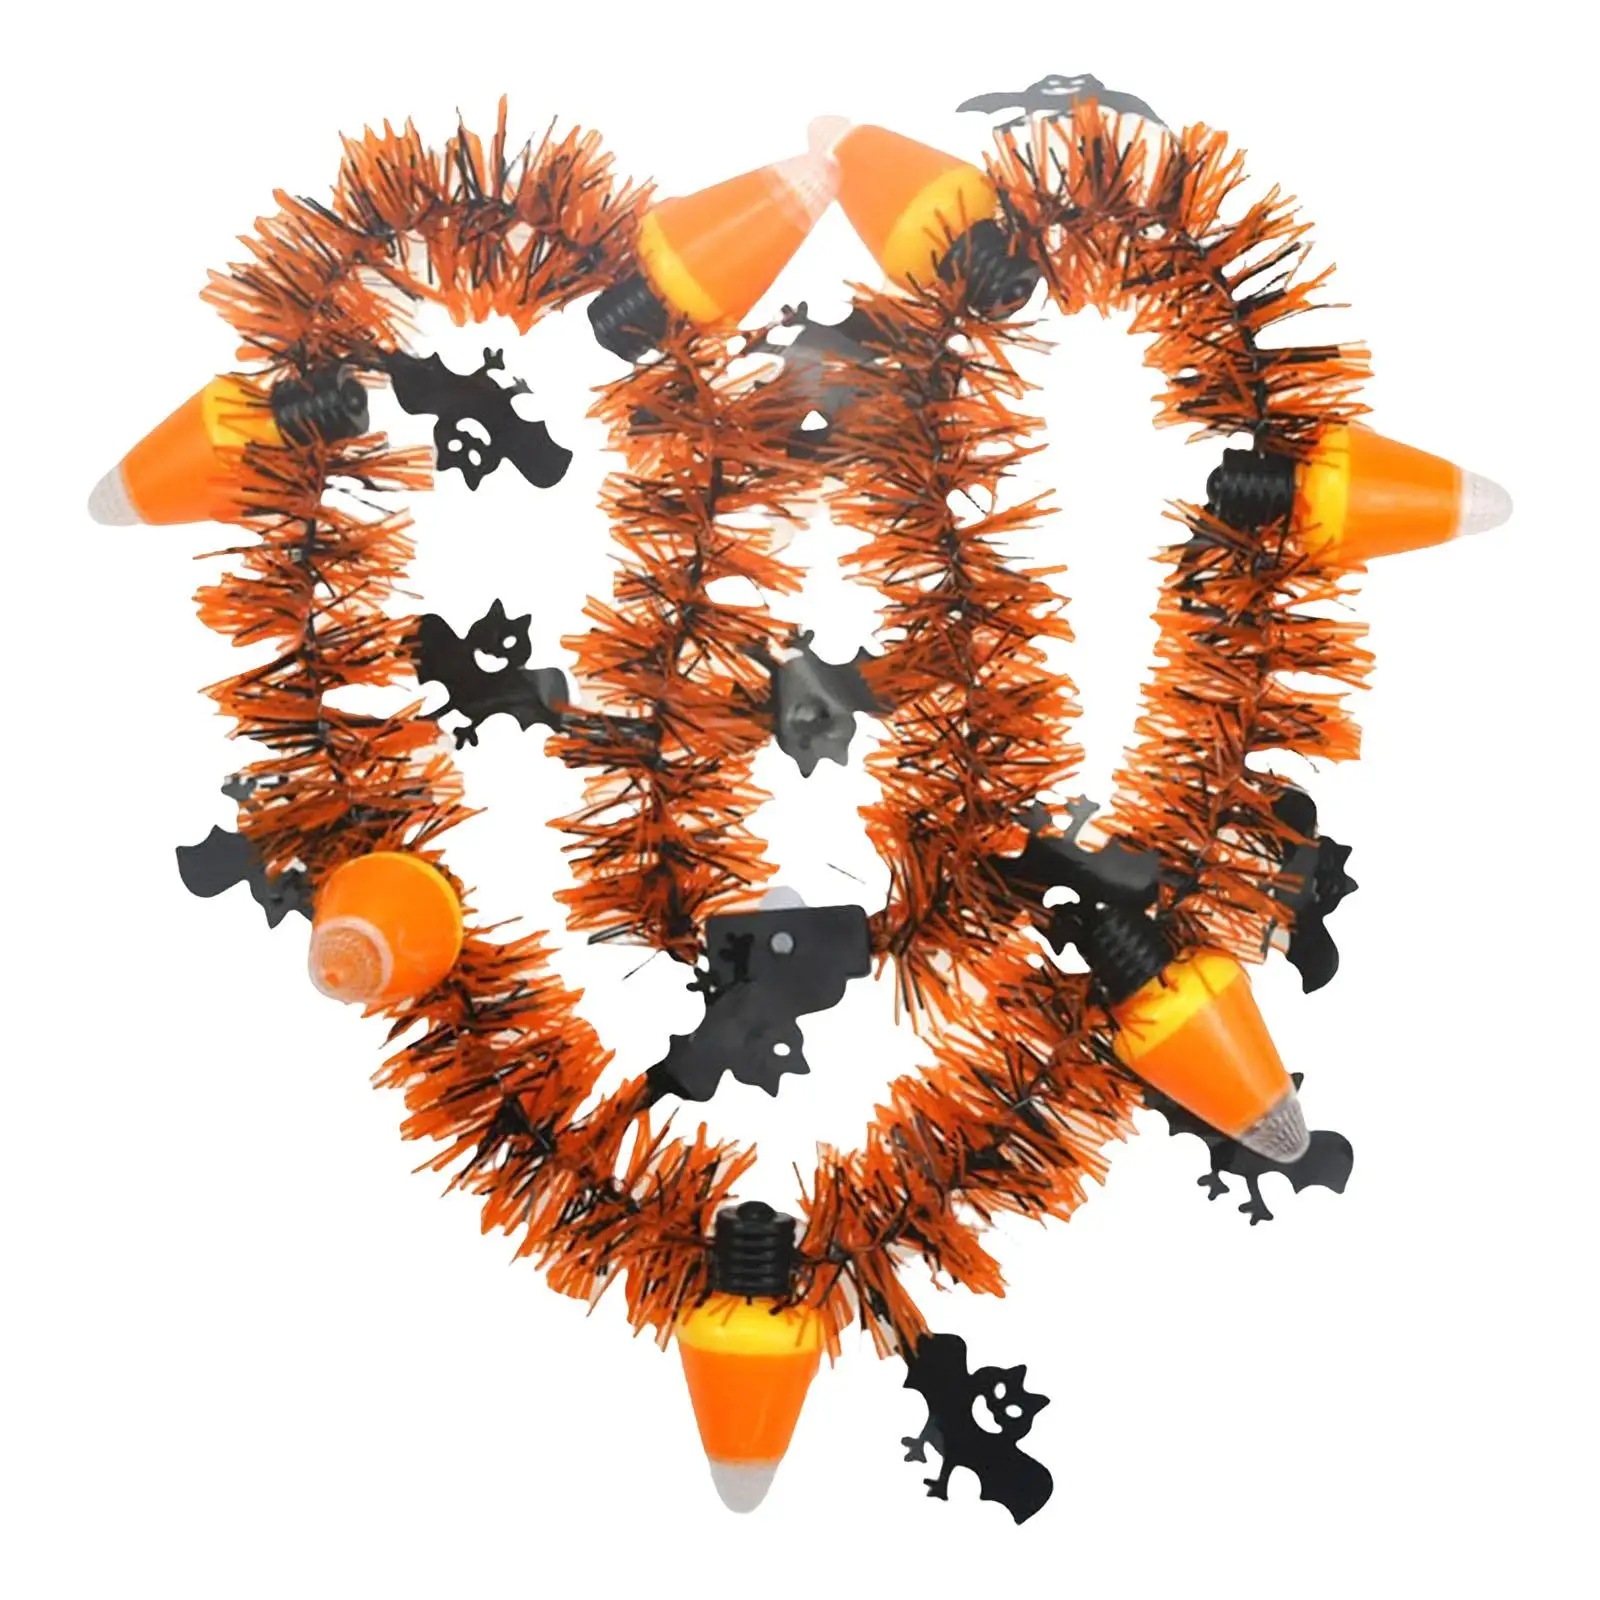 35inch Halloween String Light Battery Powered Wreath Lights Glowing Lanterns Decor Lamp Necklace for Christmas Home Party Indoor